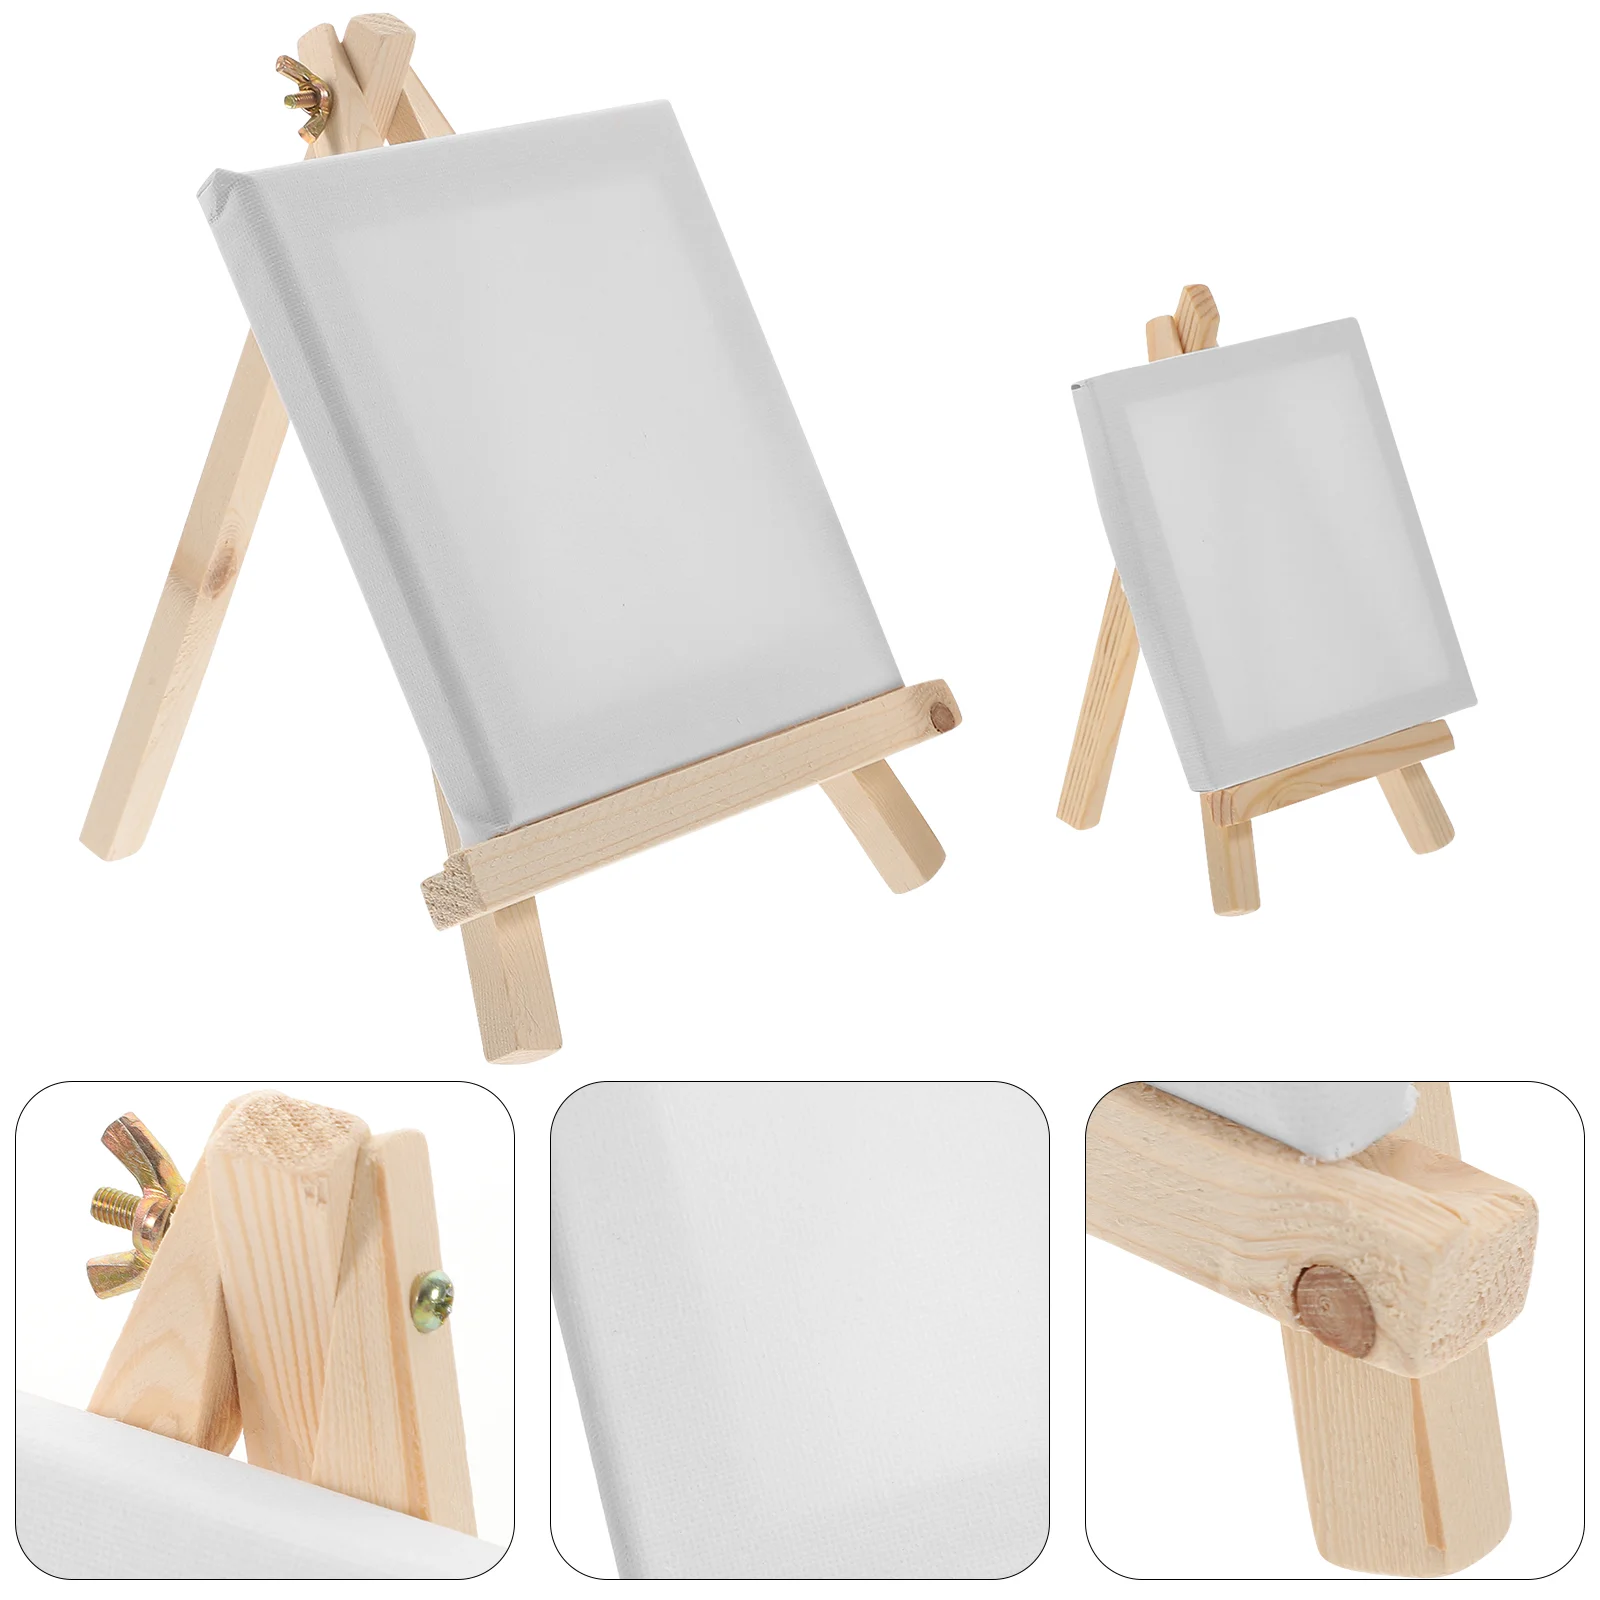 2PCs Canvas Easel Set White Blank Stretched Canvas with Wooden Easel Canvas Panel Boards for Artist Painting Business Wedding 24pcs artist blending paper stumps and tortillion set with with 4pcs sandpaper 2pcs pencil extender for student sketch drawing